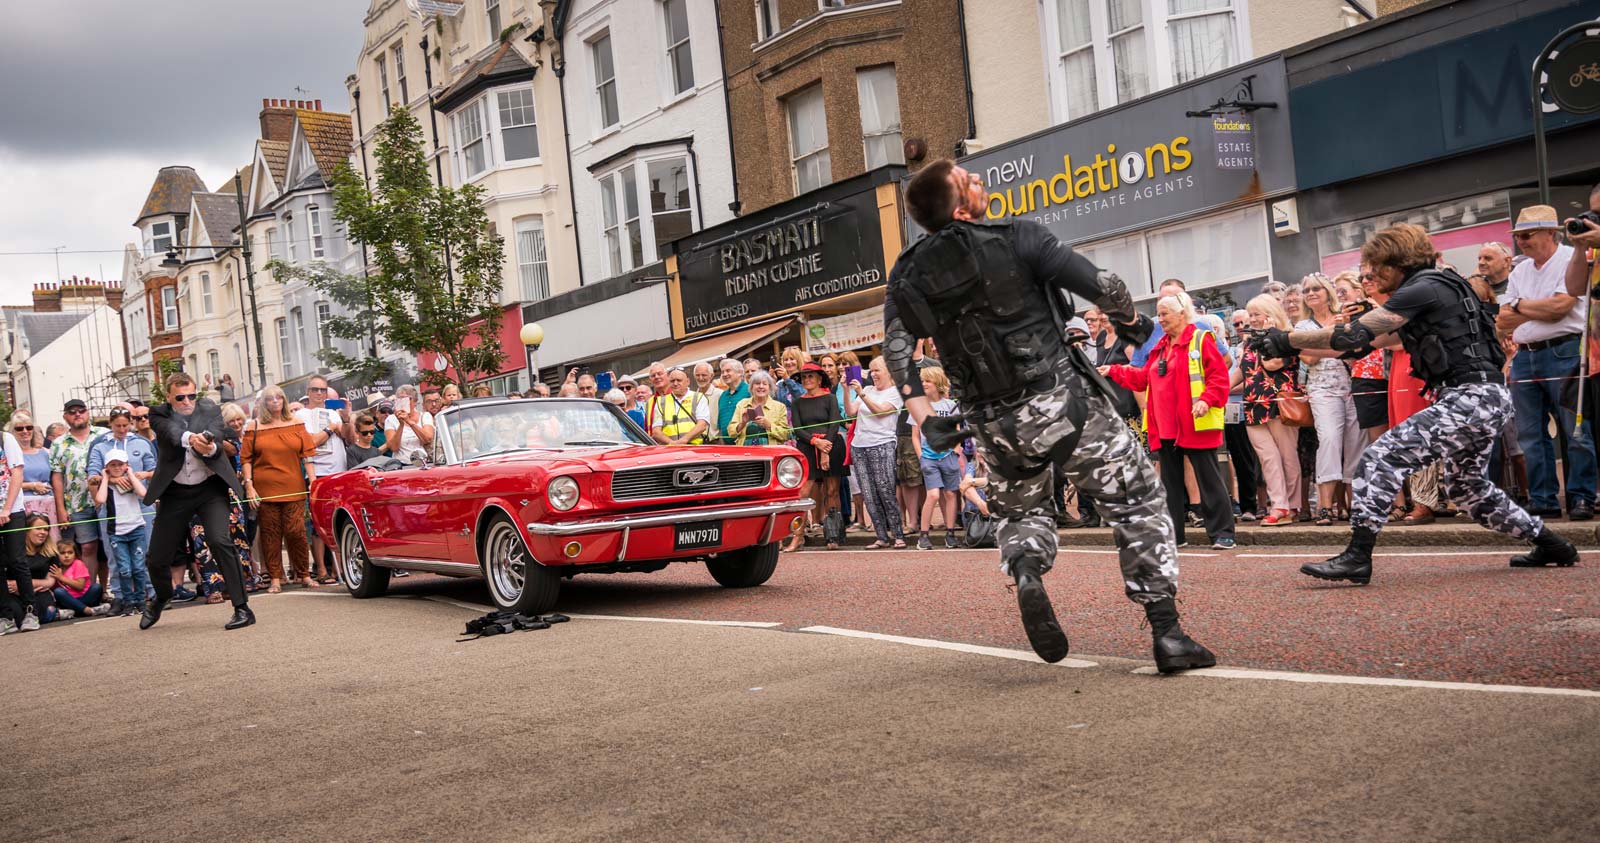 Bond stunt action in Bexhill Town Centre